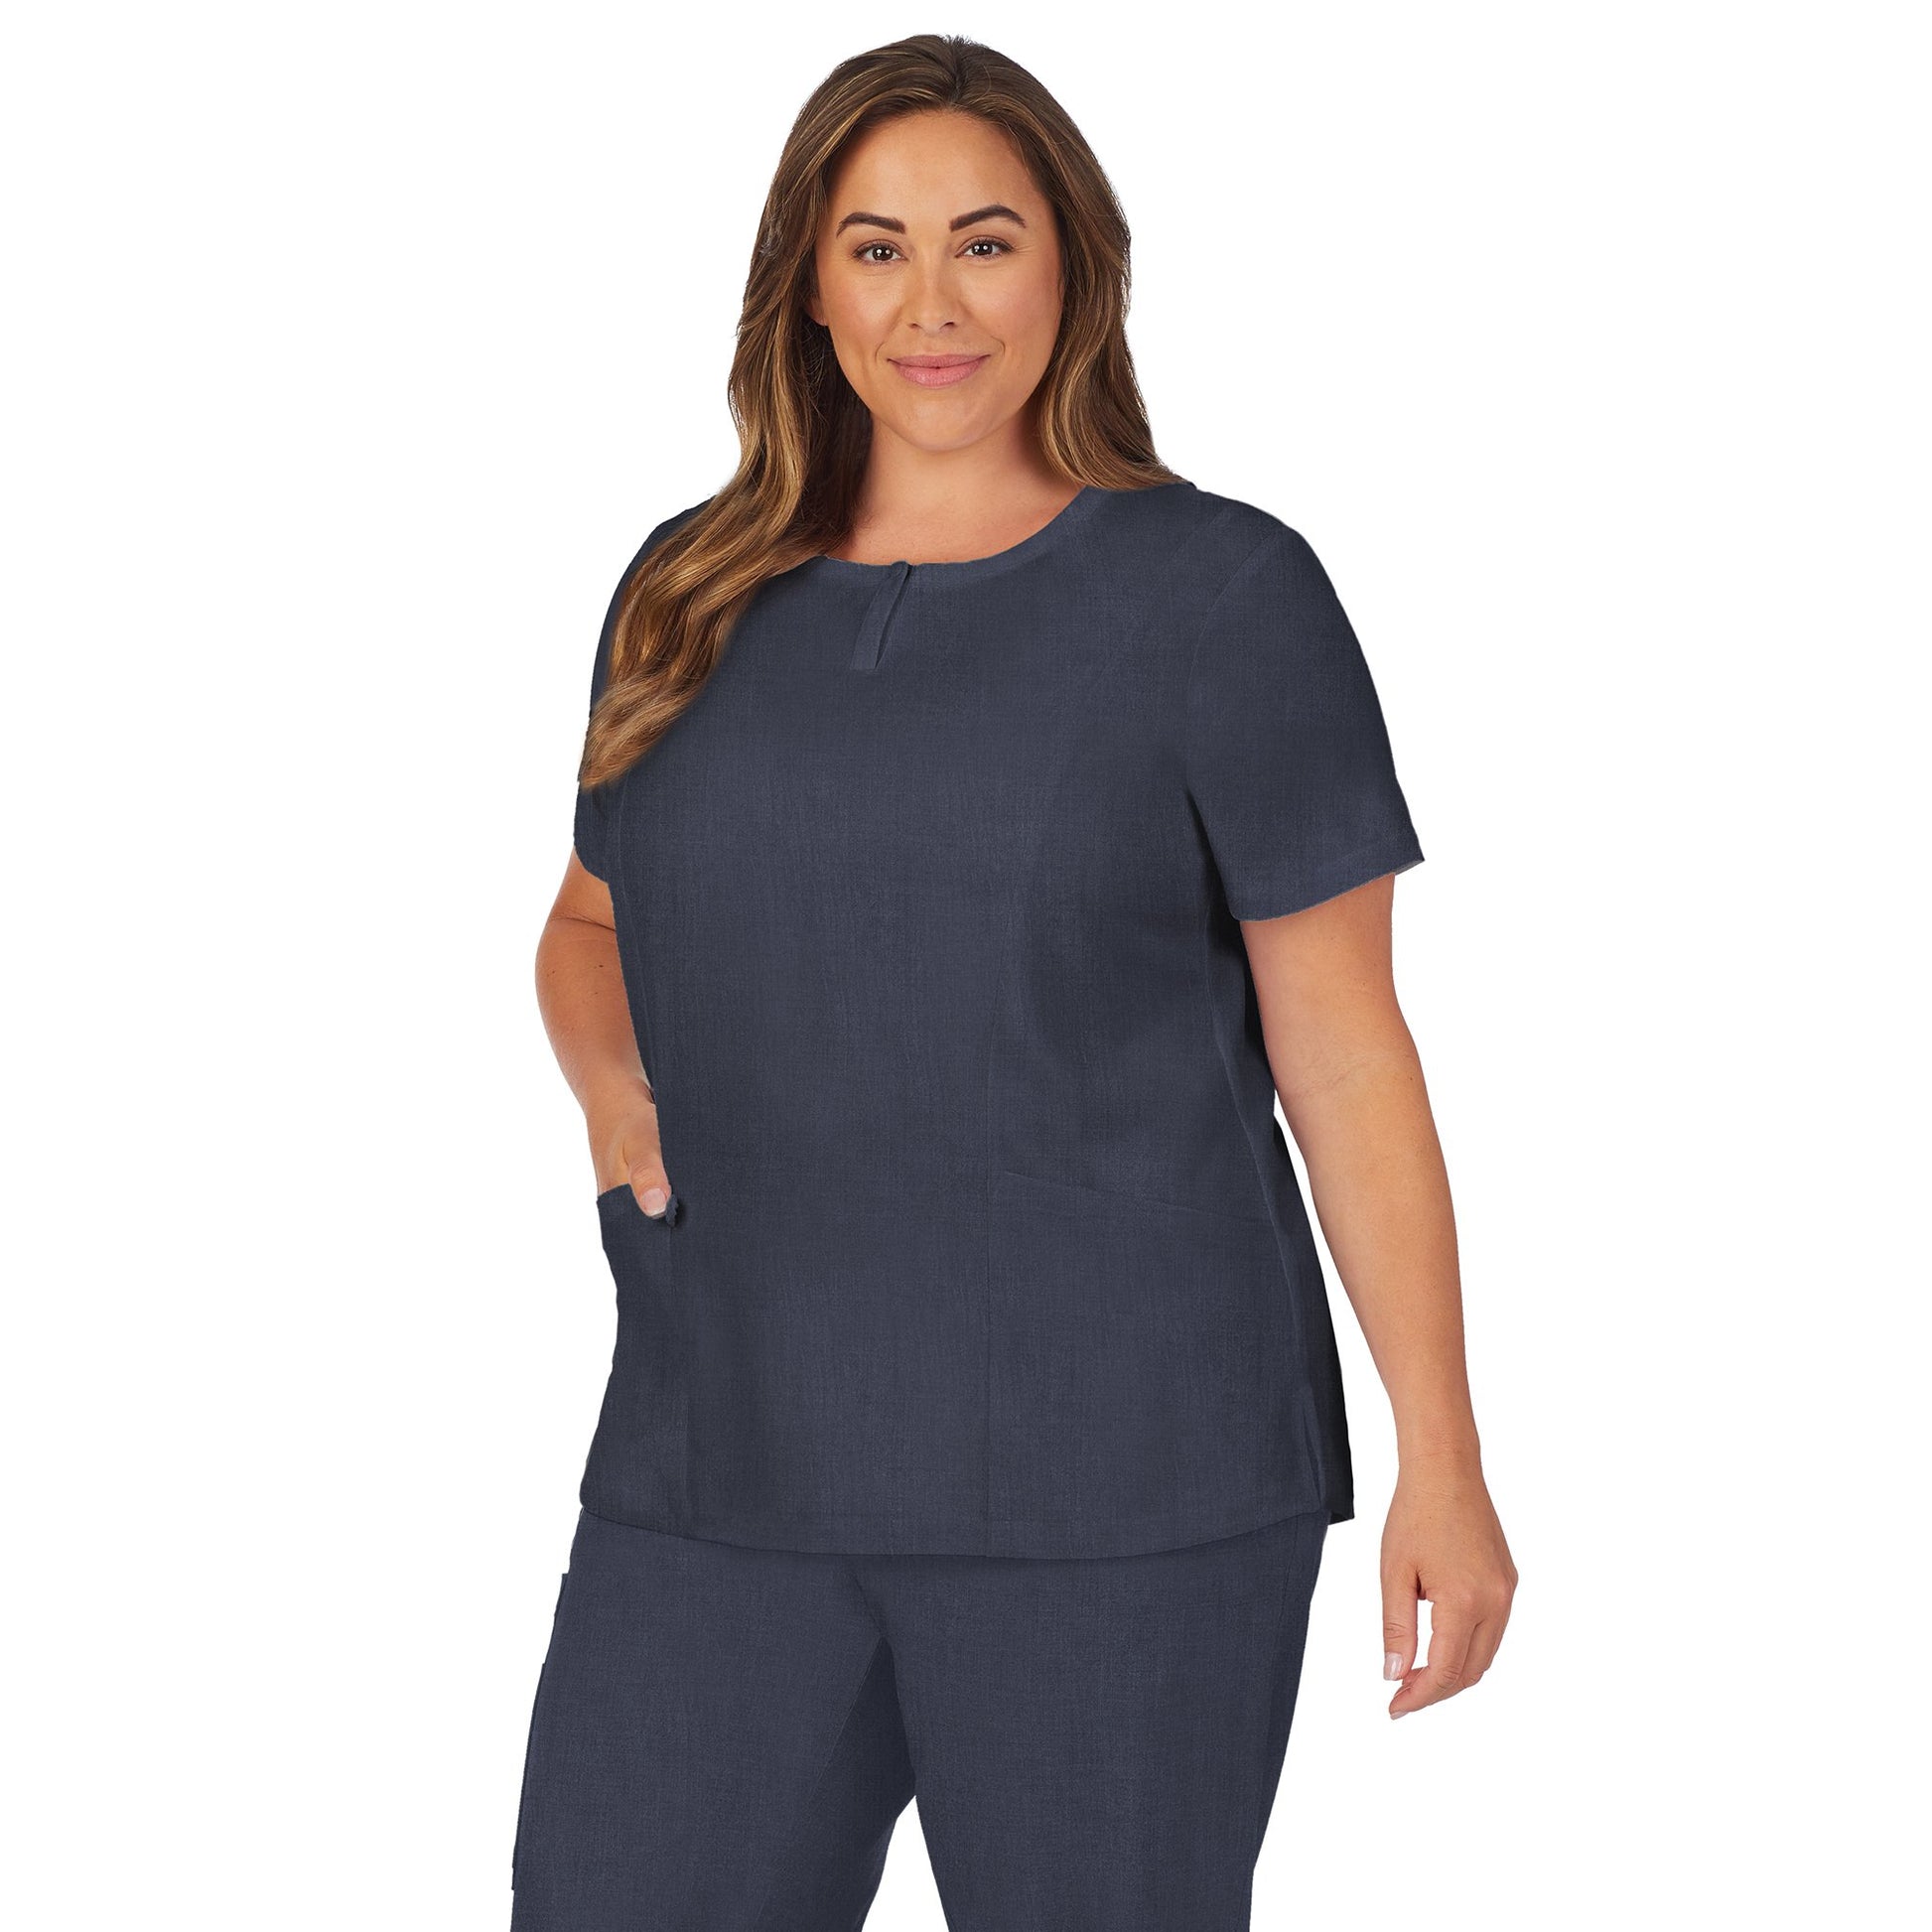 Navy Heather;Model is wearing size 1X. She is 5’9.5”, Bust 43”, Waist 37”, Hips 49.5”.@A lady wearing navy heather scrub henley neck top with side pockets plus.